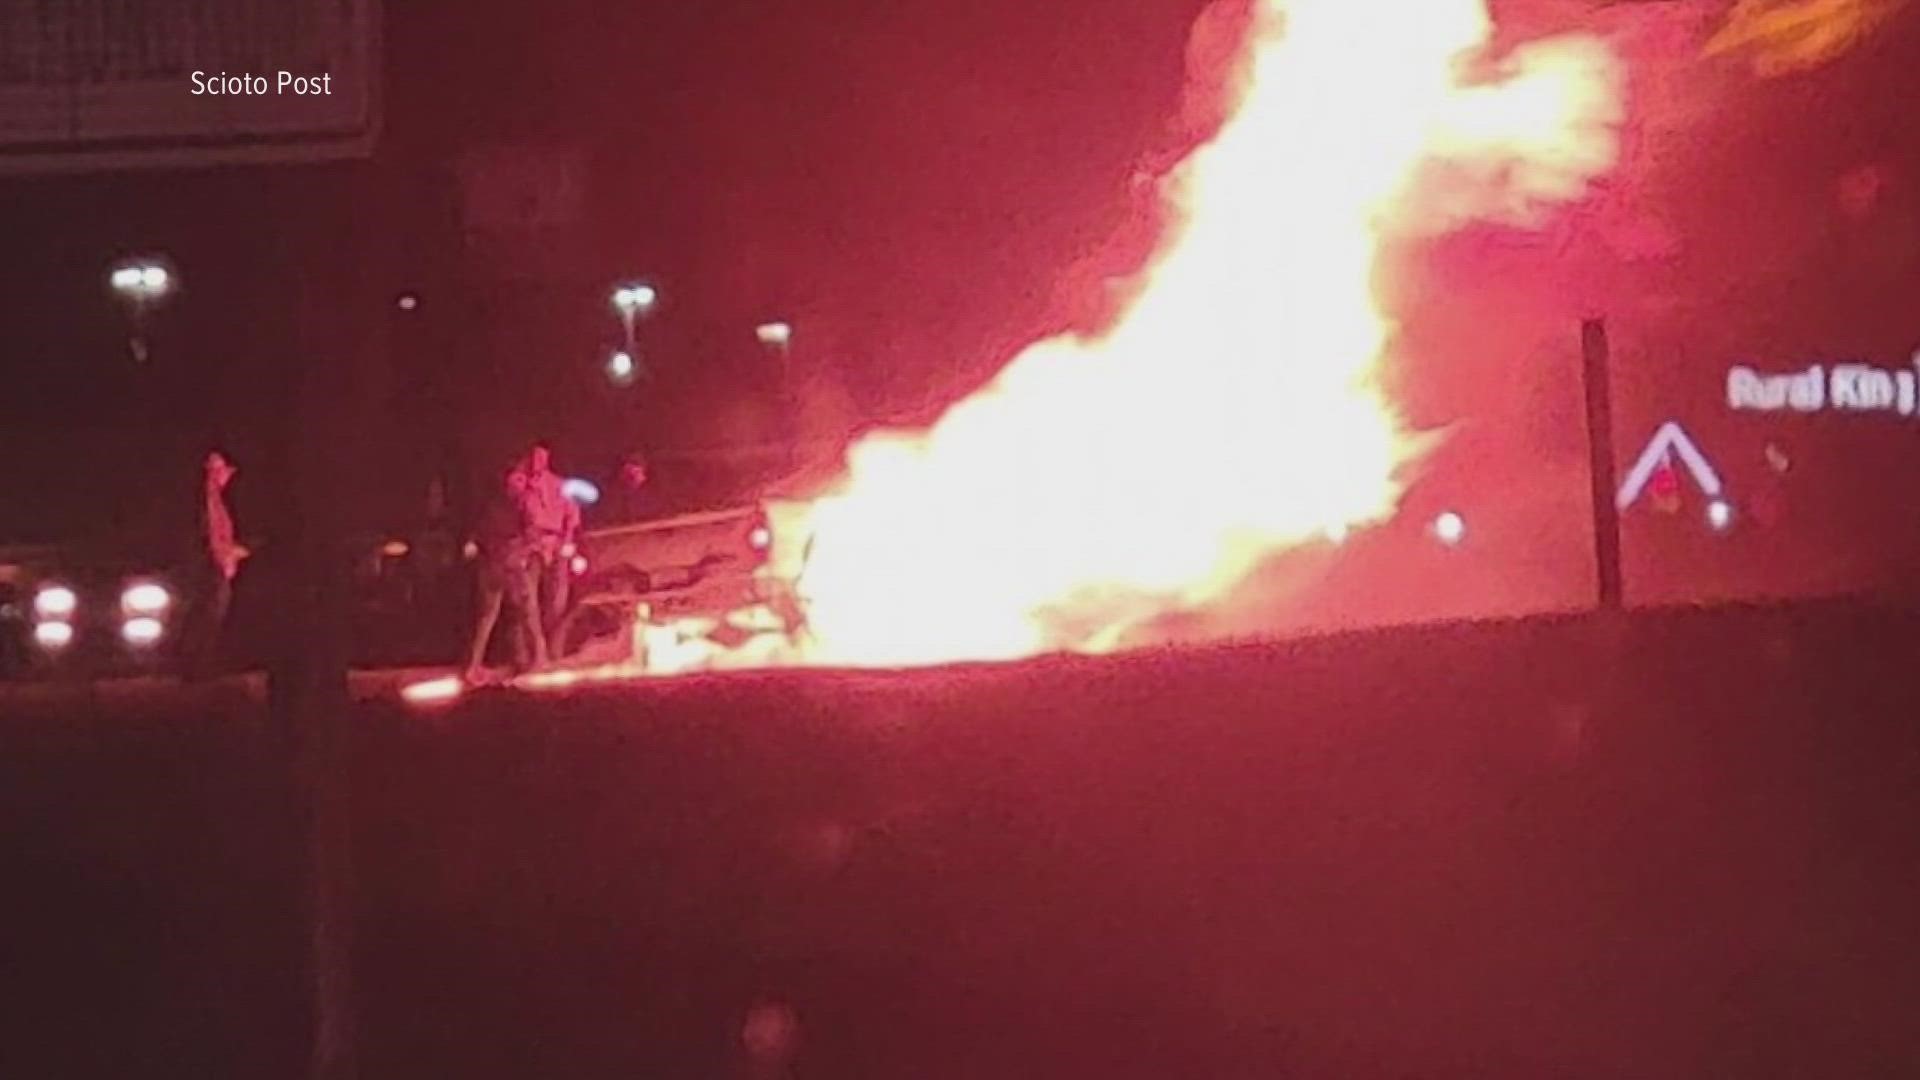 The off-duty firefighter and the bystanders were able to pull the man out of the burning truck and stay with him until on-duty EMTs arrived.